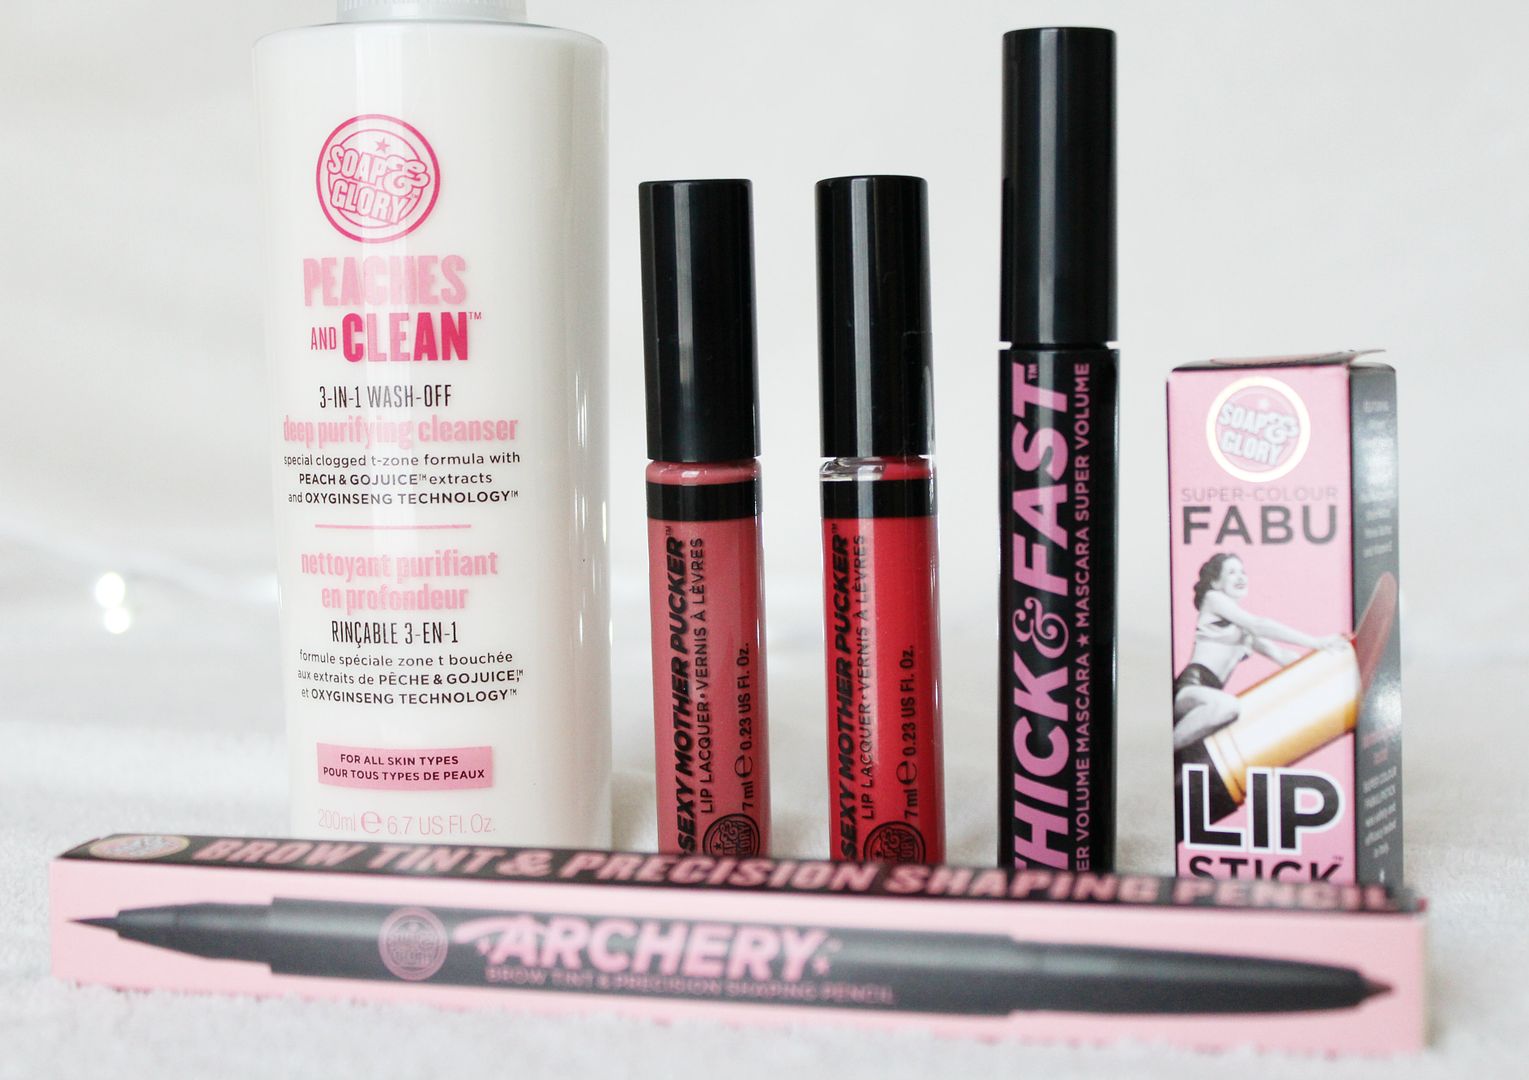 Soap And Glory Beauty Haul Winter 2015 Peaches And Clean Sexy Mother Pucker Lip Lacquer Thick And Fast Super Colour Fabu Lipstick Archery Belle-Amie UK Beauty Fashion Lifestyle Blog